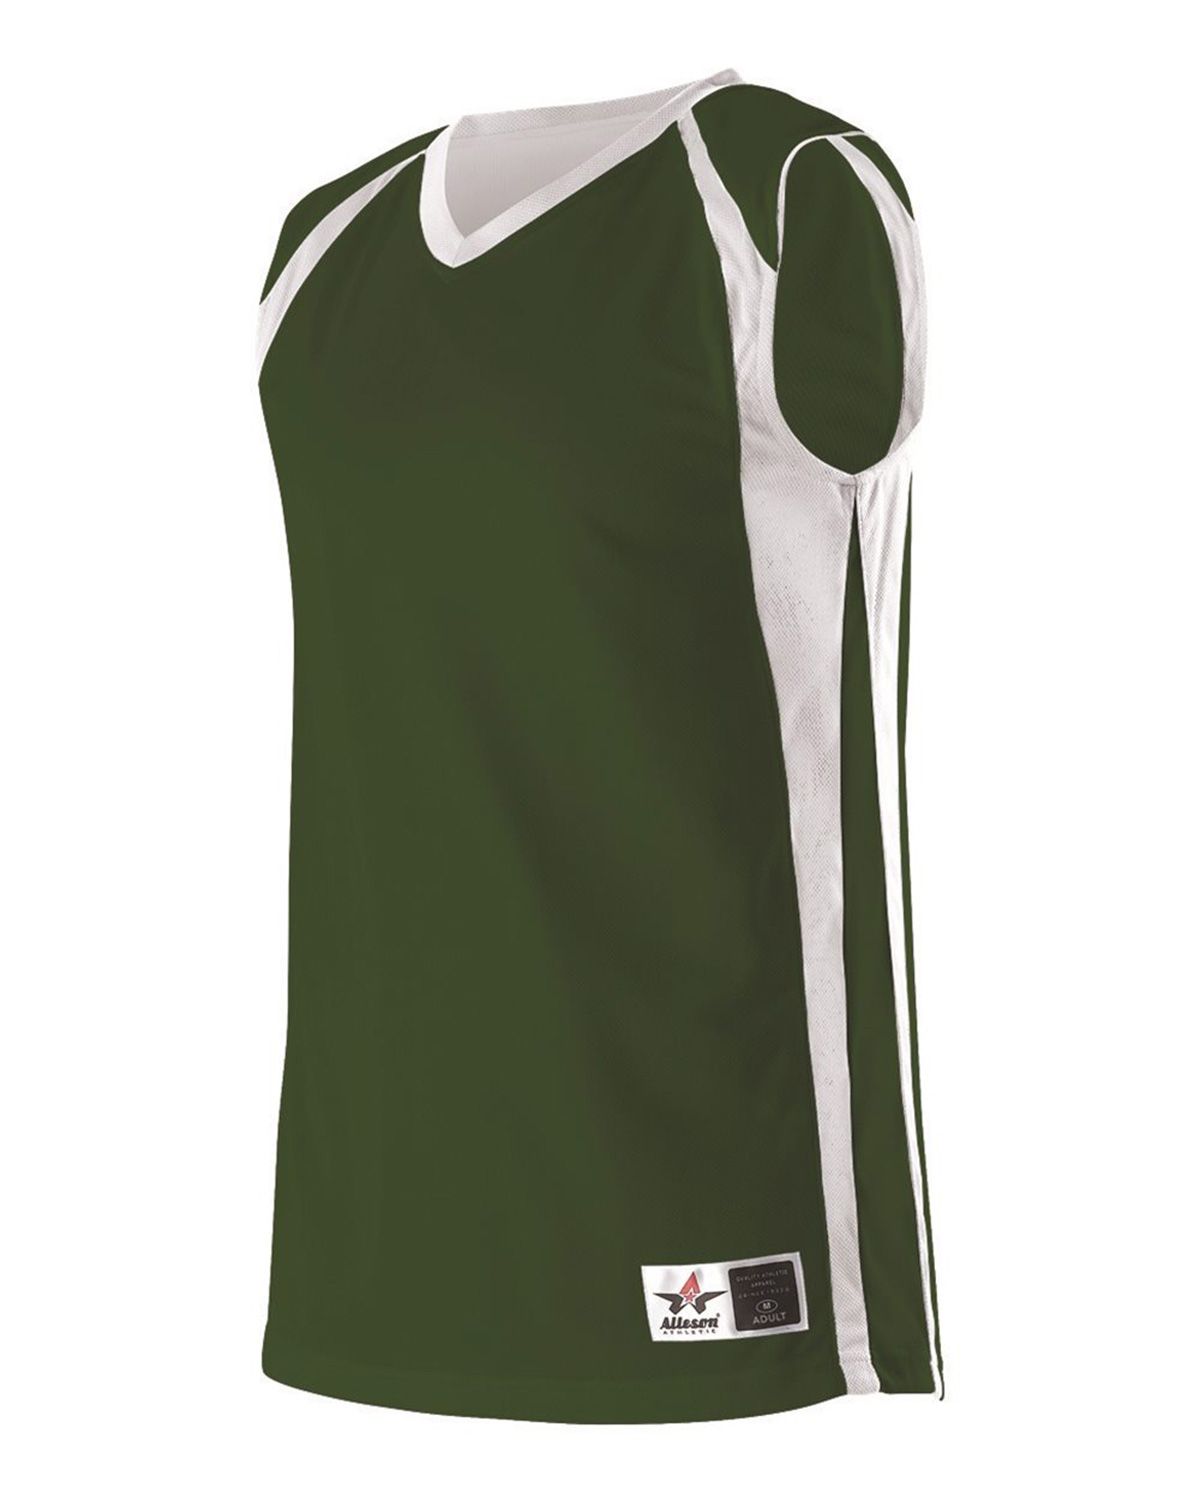 Youth Alleson Athletic NBA Celtics Reversible Jersey